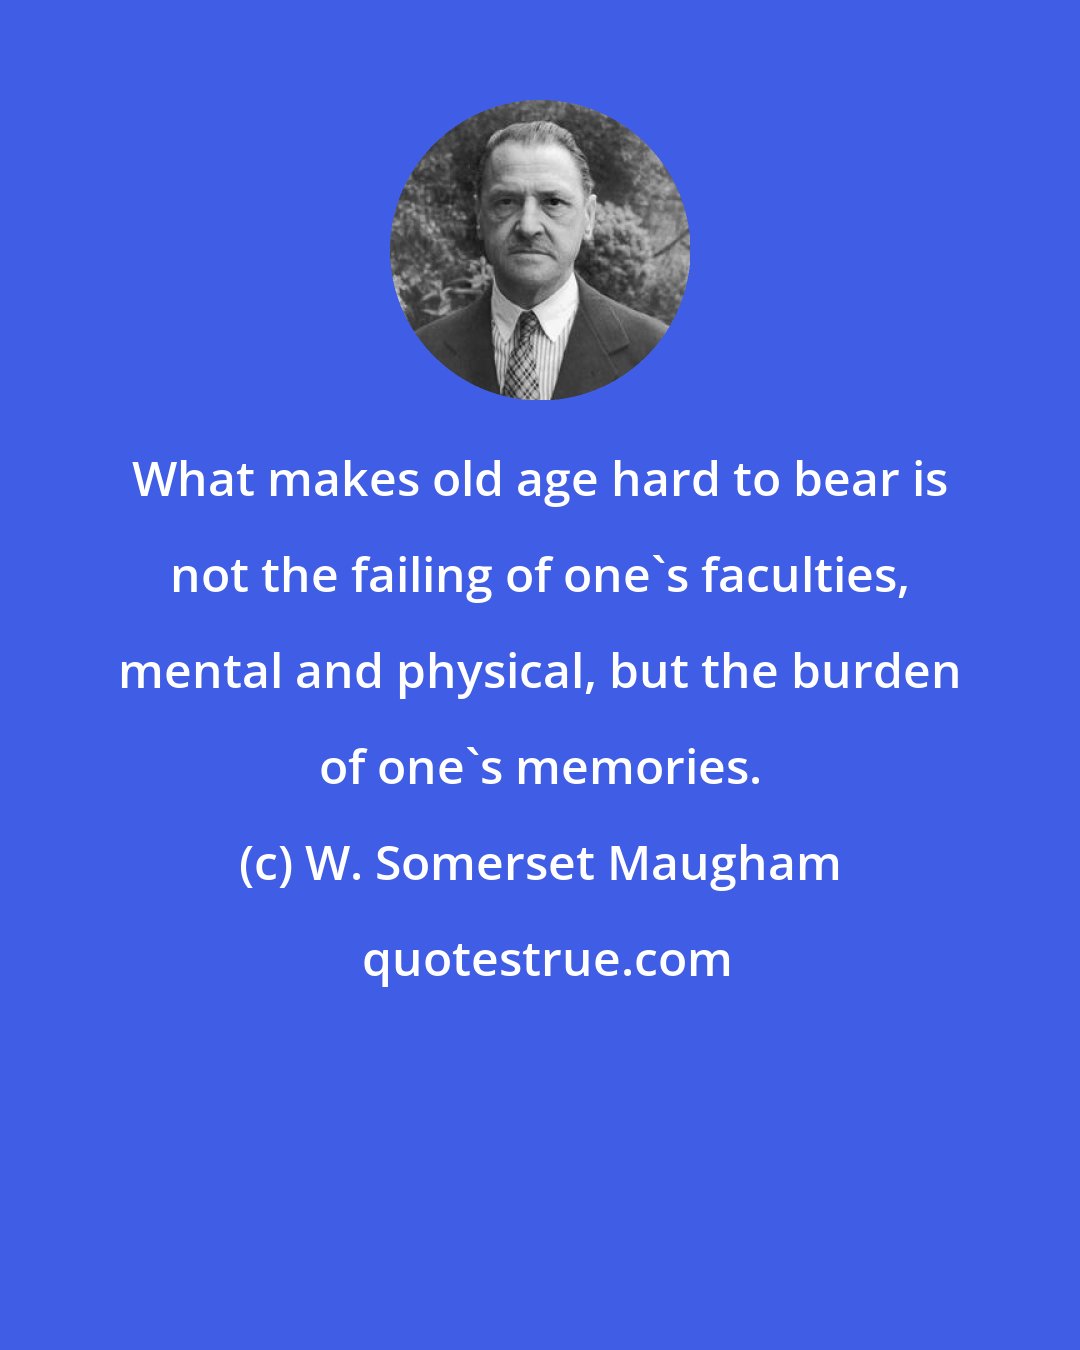 W. Somerset Maugham: What makes old age hard to bear is not the failing of one's faculties, mental and physical, but the burden of one's memories.